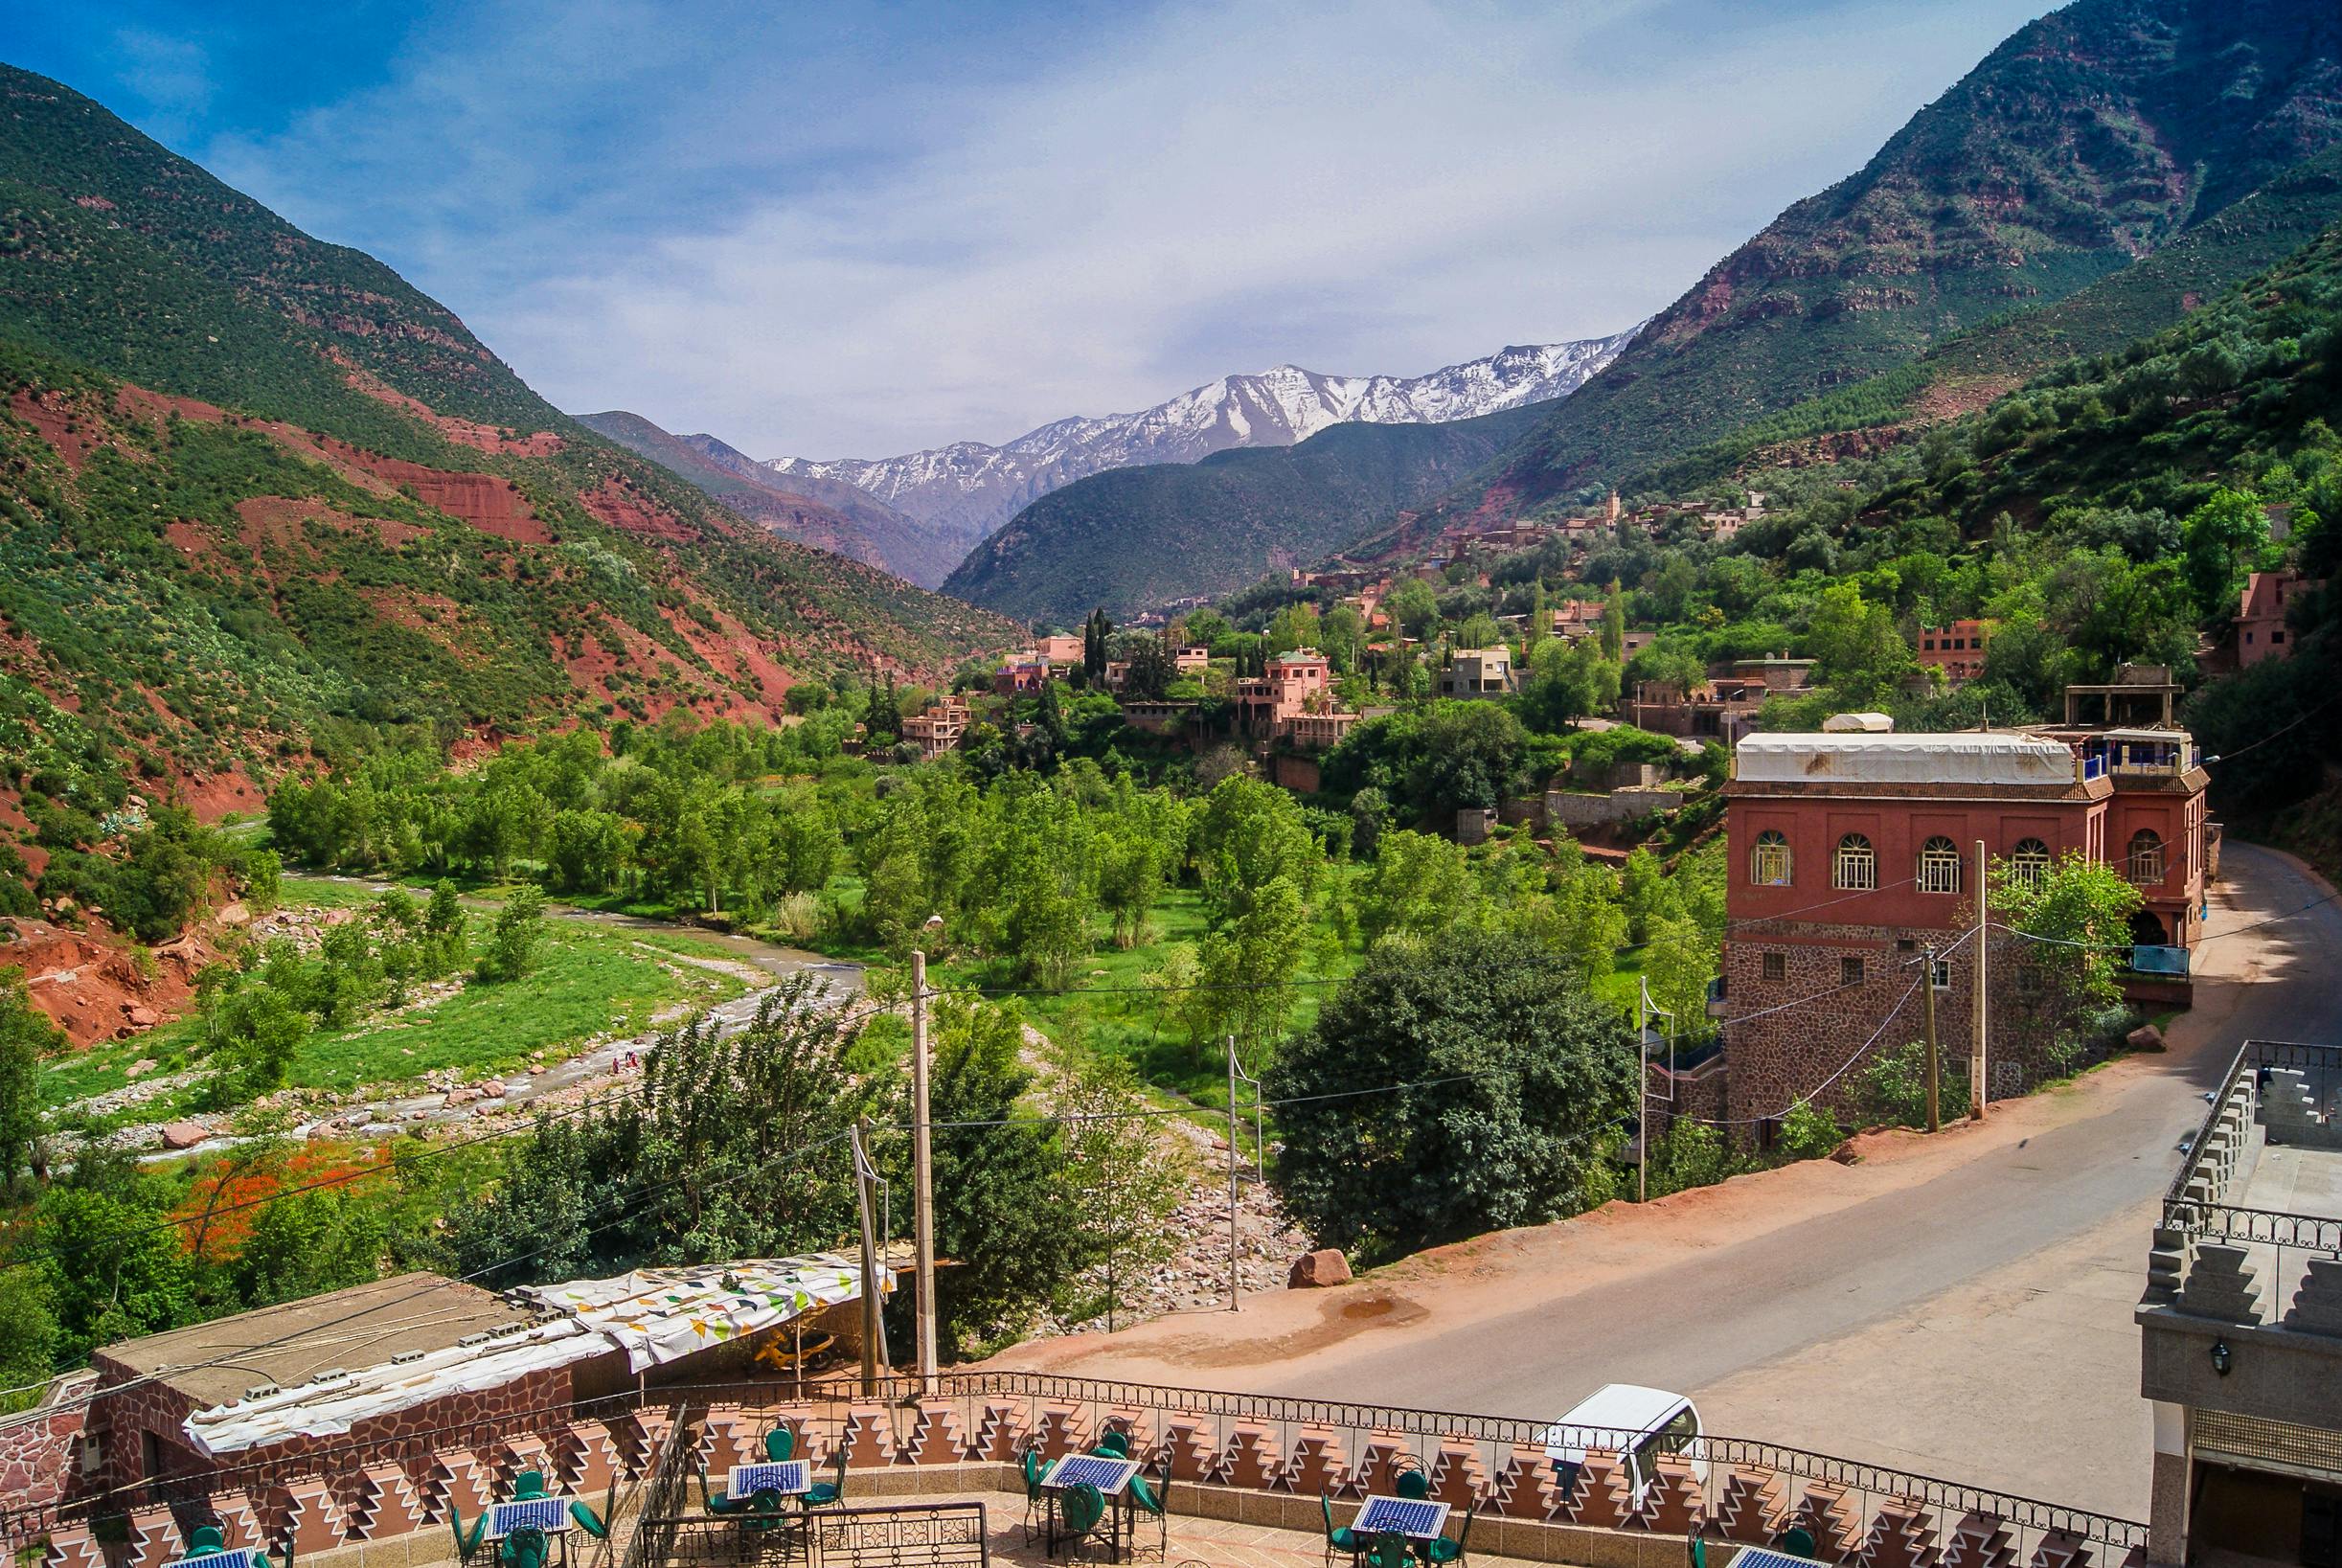 Half-day excursion to the Ourika valley from Marrakech